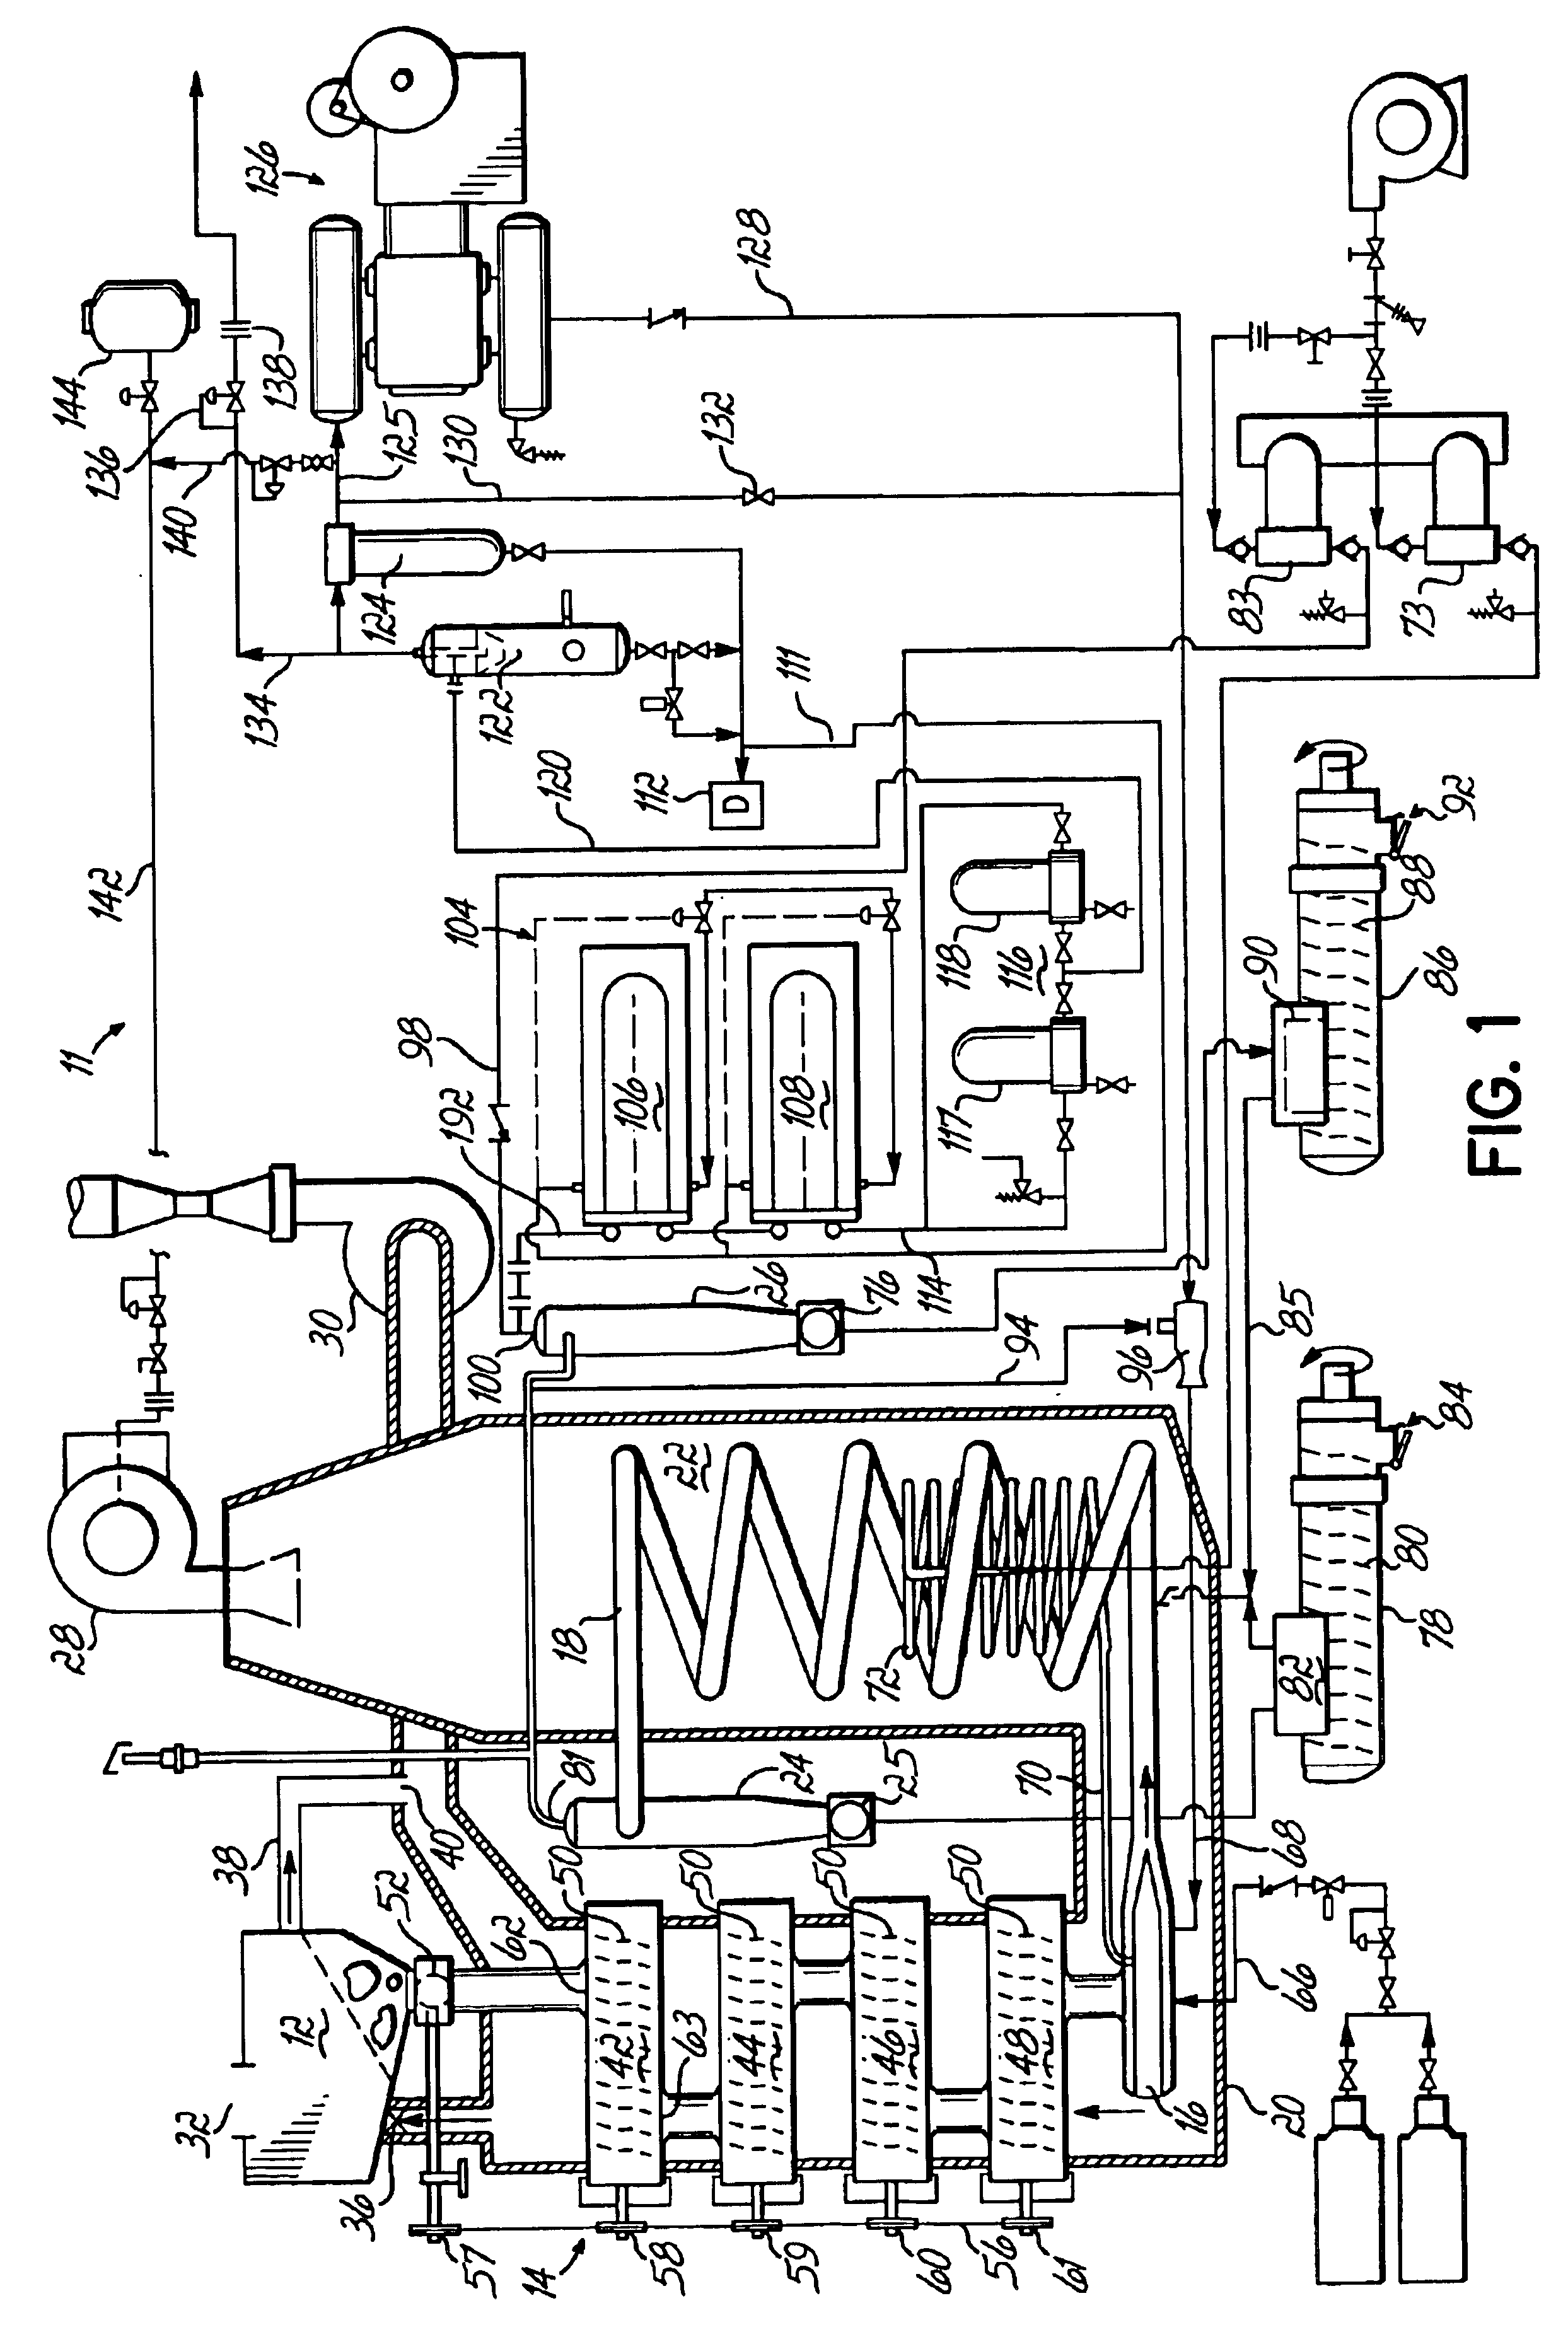 Method and apparatus for producing synthesis gas from carbonaceous materials